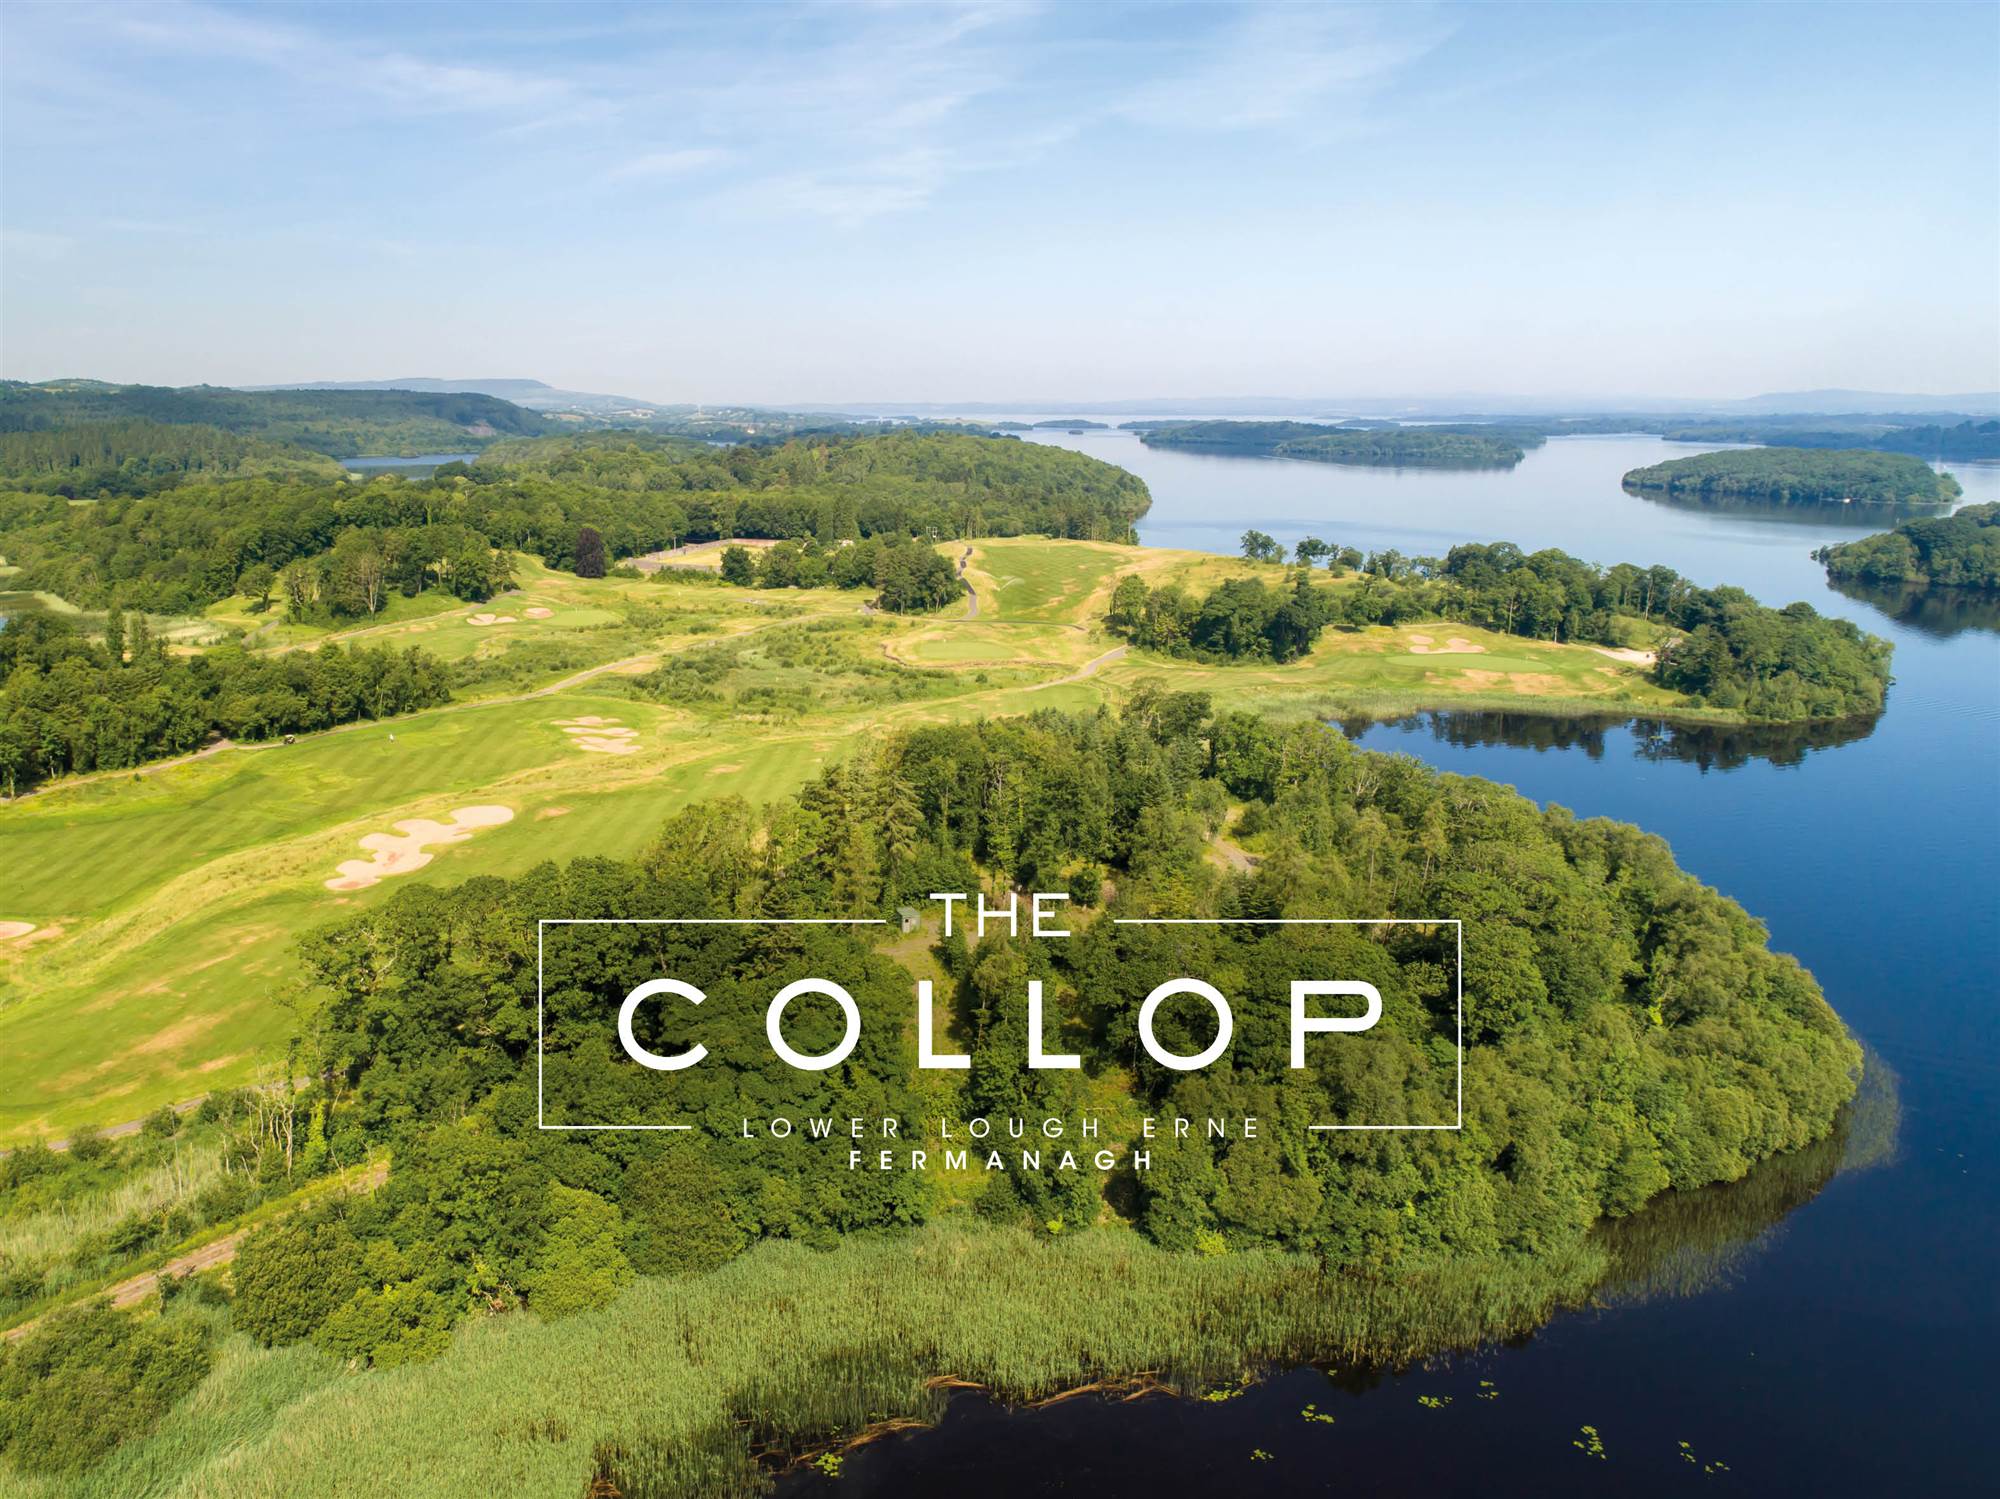 THE COLLOP, Lower Lough Erne, Fermanagh